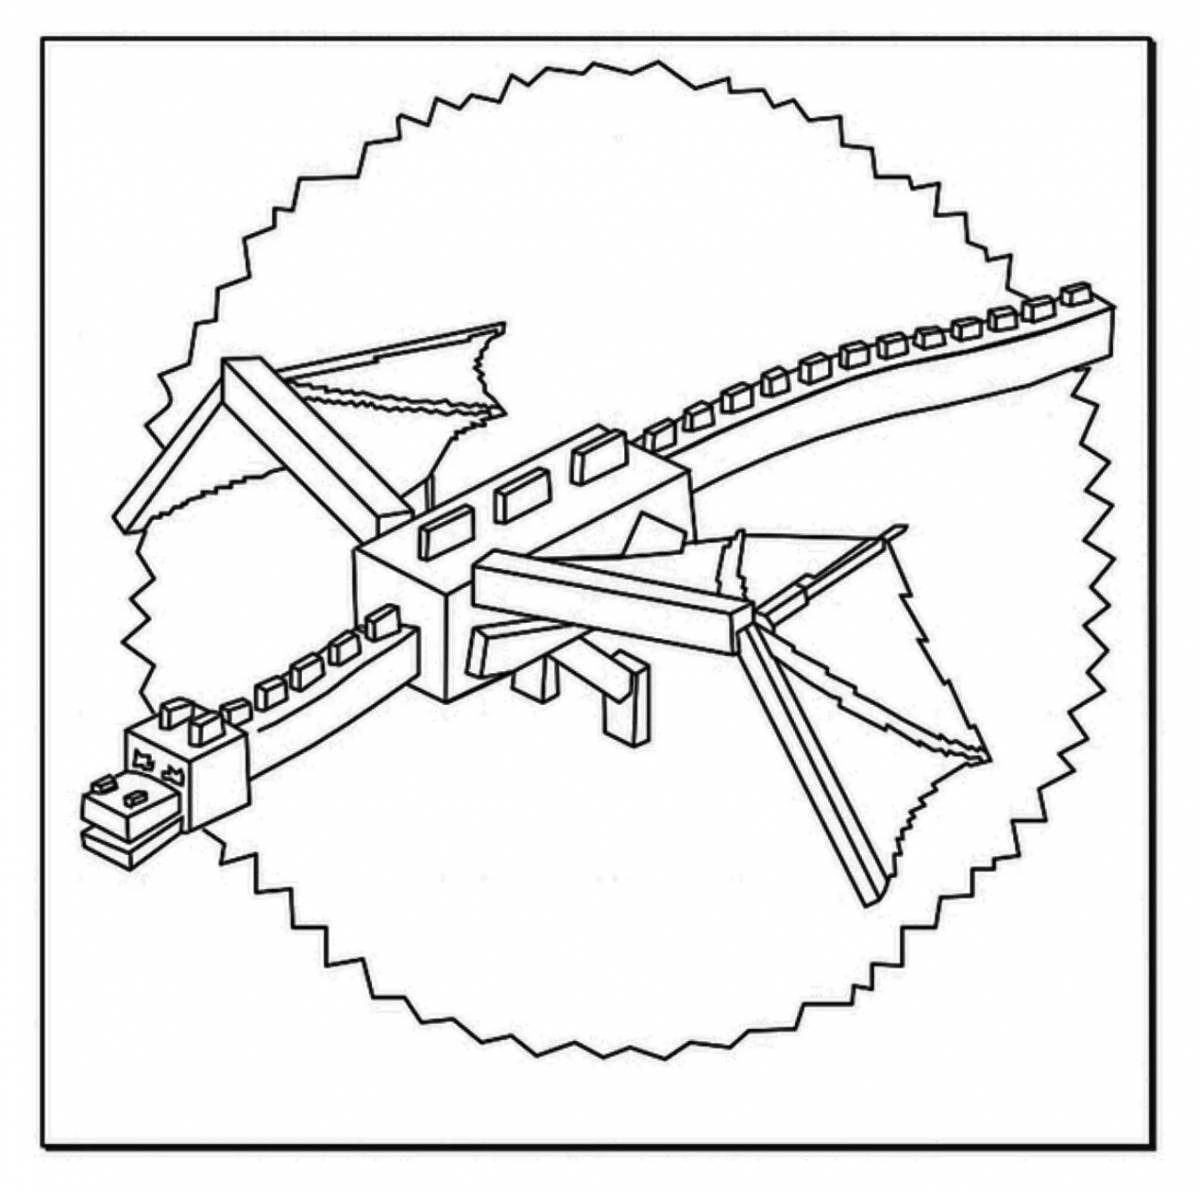 Ender world comforting coloring page